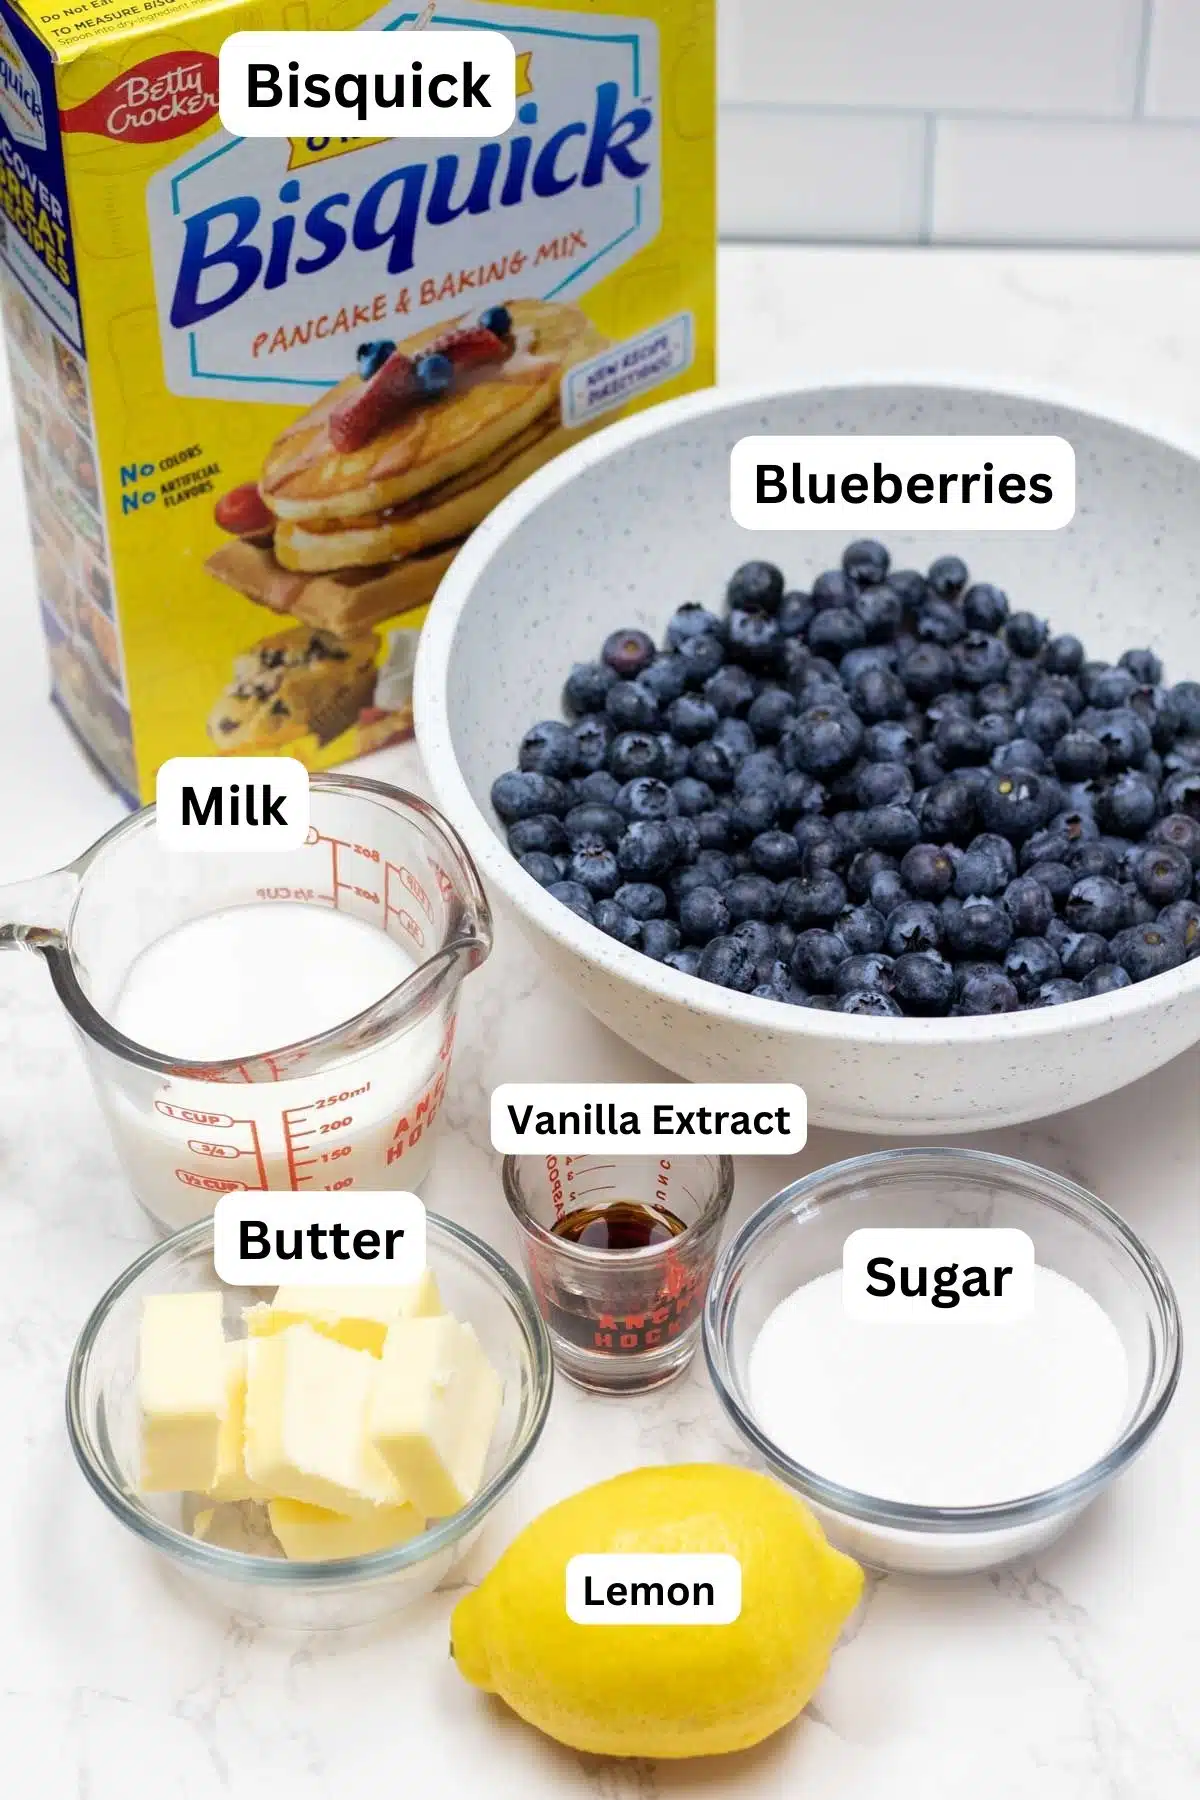 Tall image of the ingredients for Bisquick blueberry cobbler with labels.